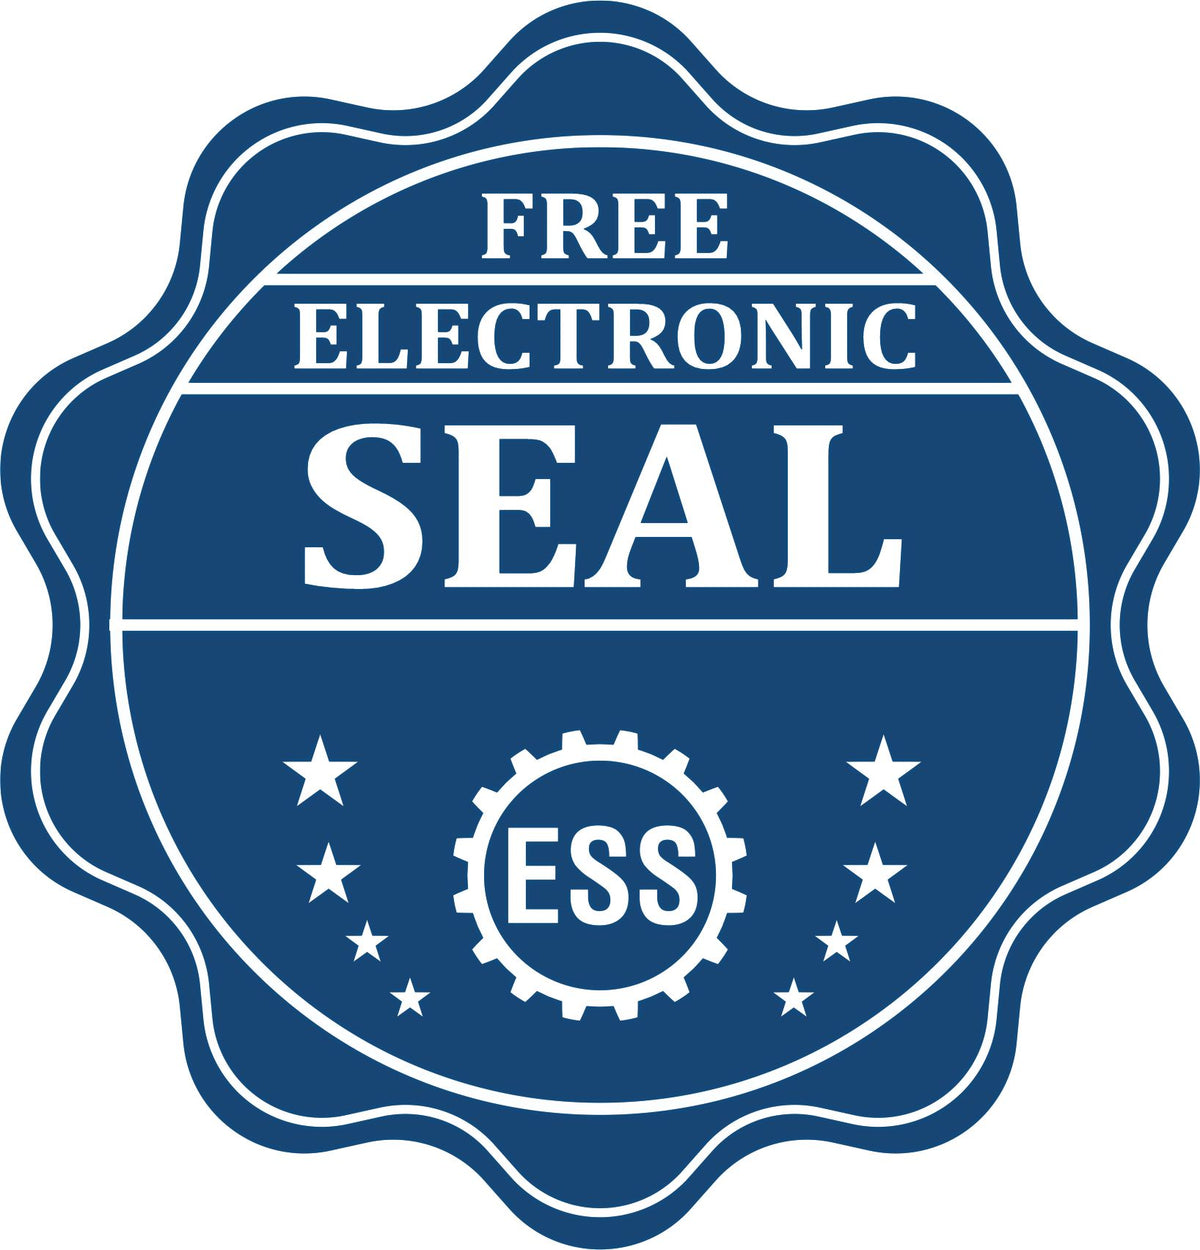 A badge showing a free electronic seal for the Gift Maine Landscape Architect Seal with stars and the ESS gear on the emblem.